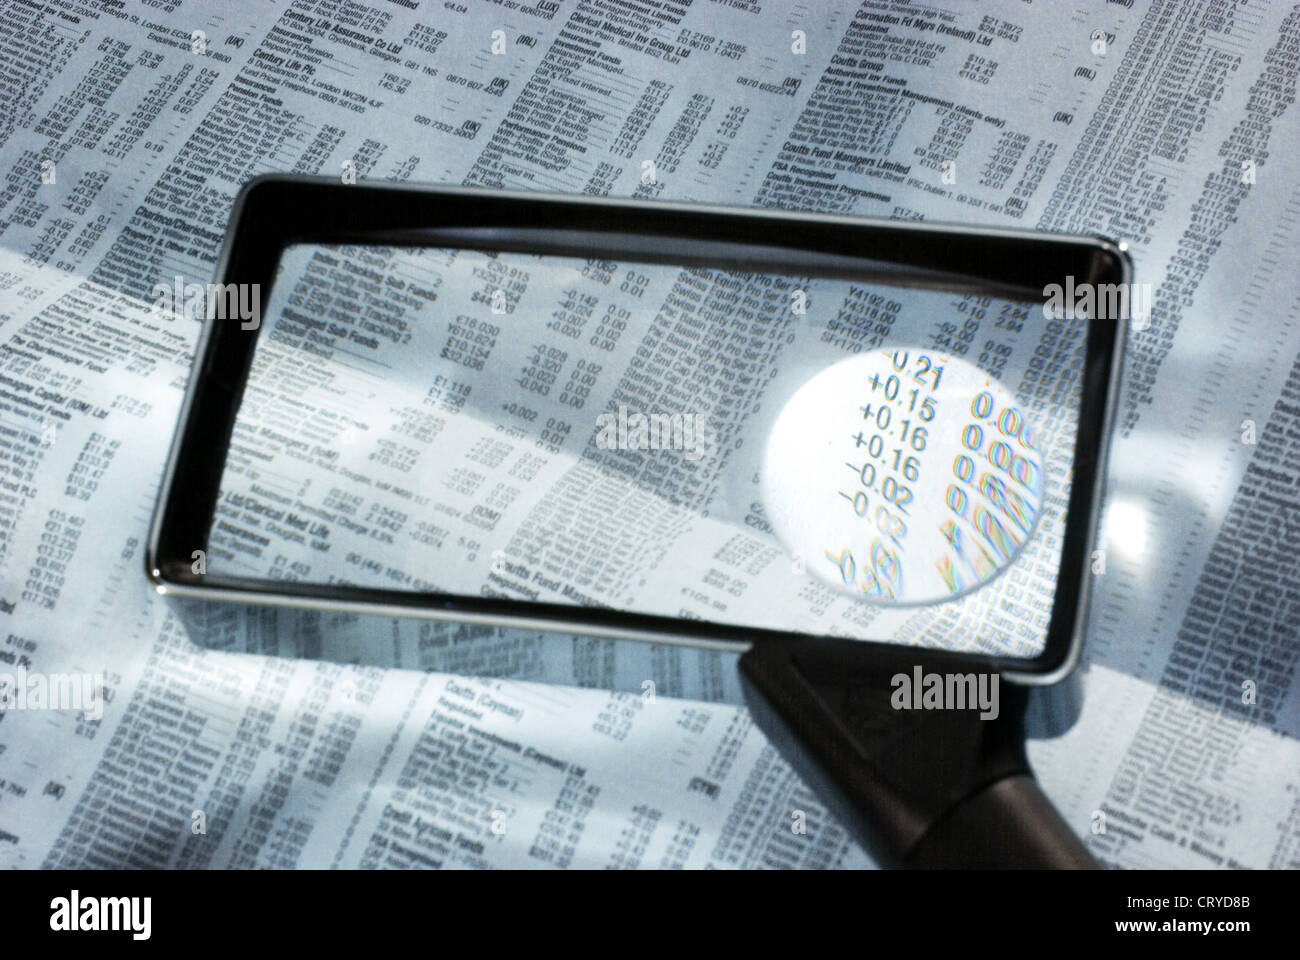 Magnifies gains and losses on the stock market news Stock Photo